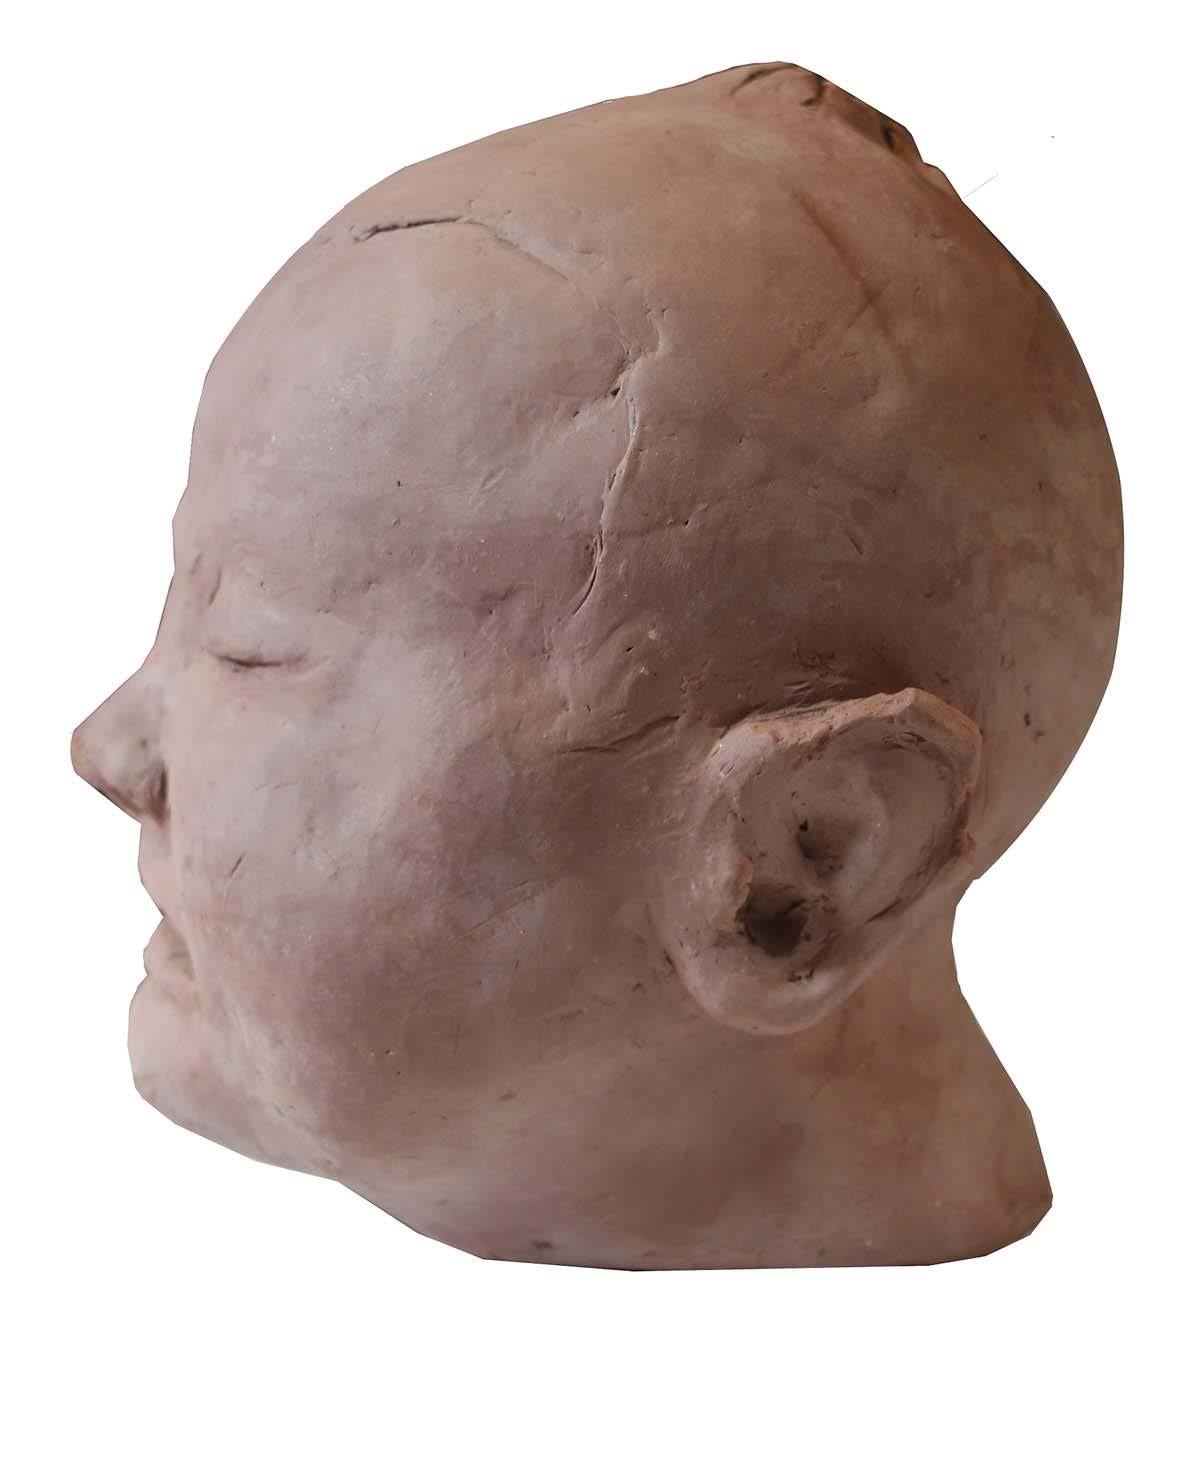 A wonderful sculpture of a sleeping baby's face or head. Done by the sculpture Lee Collette, the image invokes thought and is well done. Originally a commissioned piece it was not completed leaving a wonderful Primitive feel.